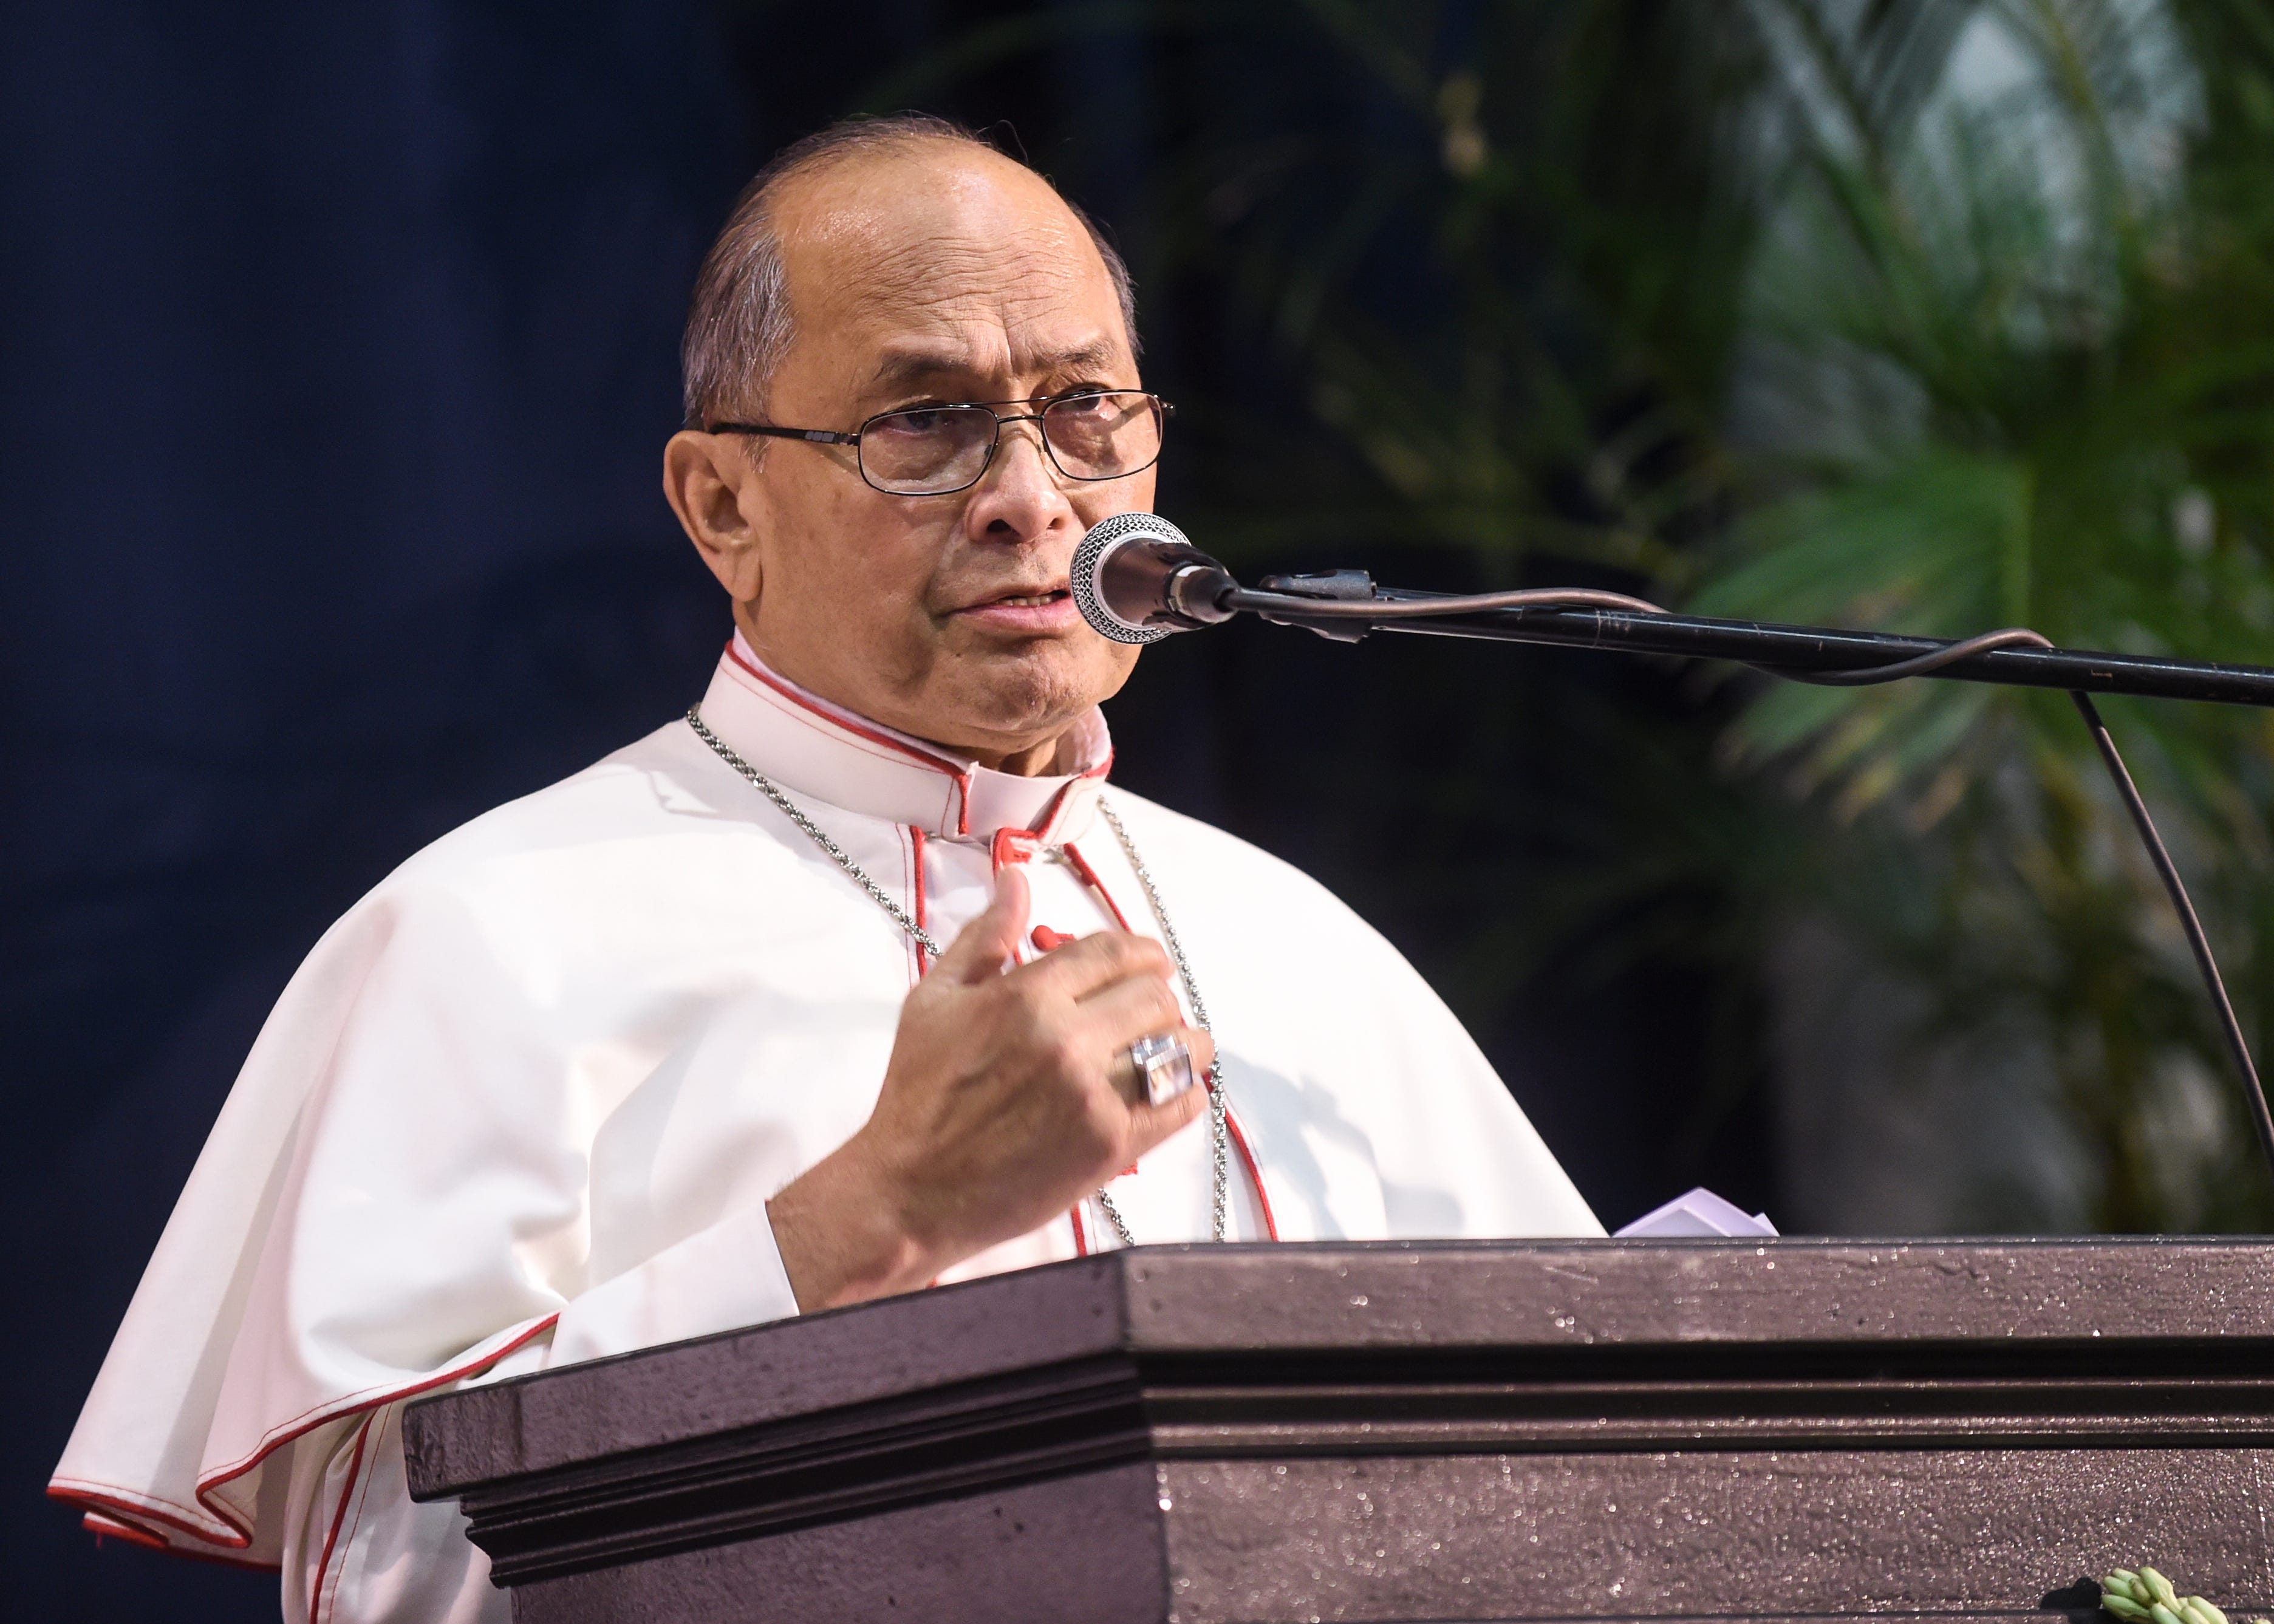 Lawyer: Vatican could decide Guam archbishop's fate by summer